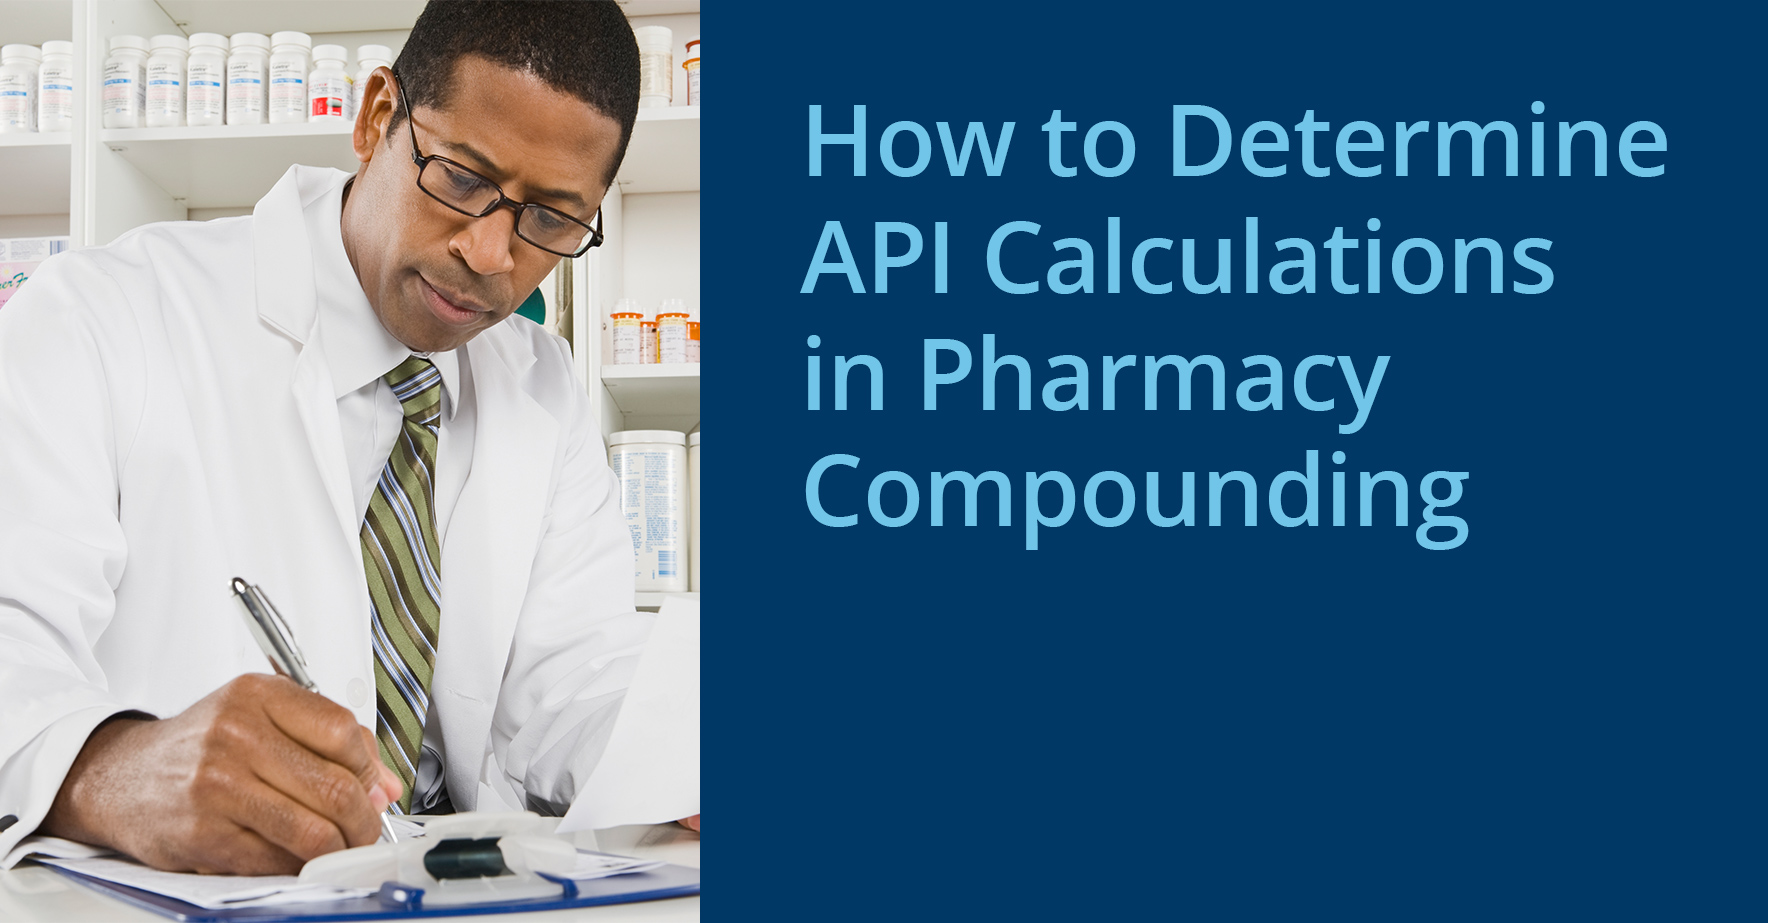 How_to_Determine_API_Calculations_in_Pharmacy_Compounding.jpg